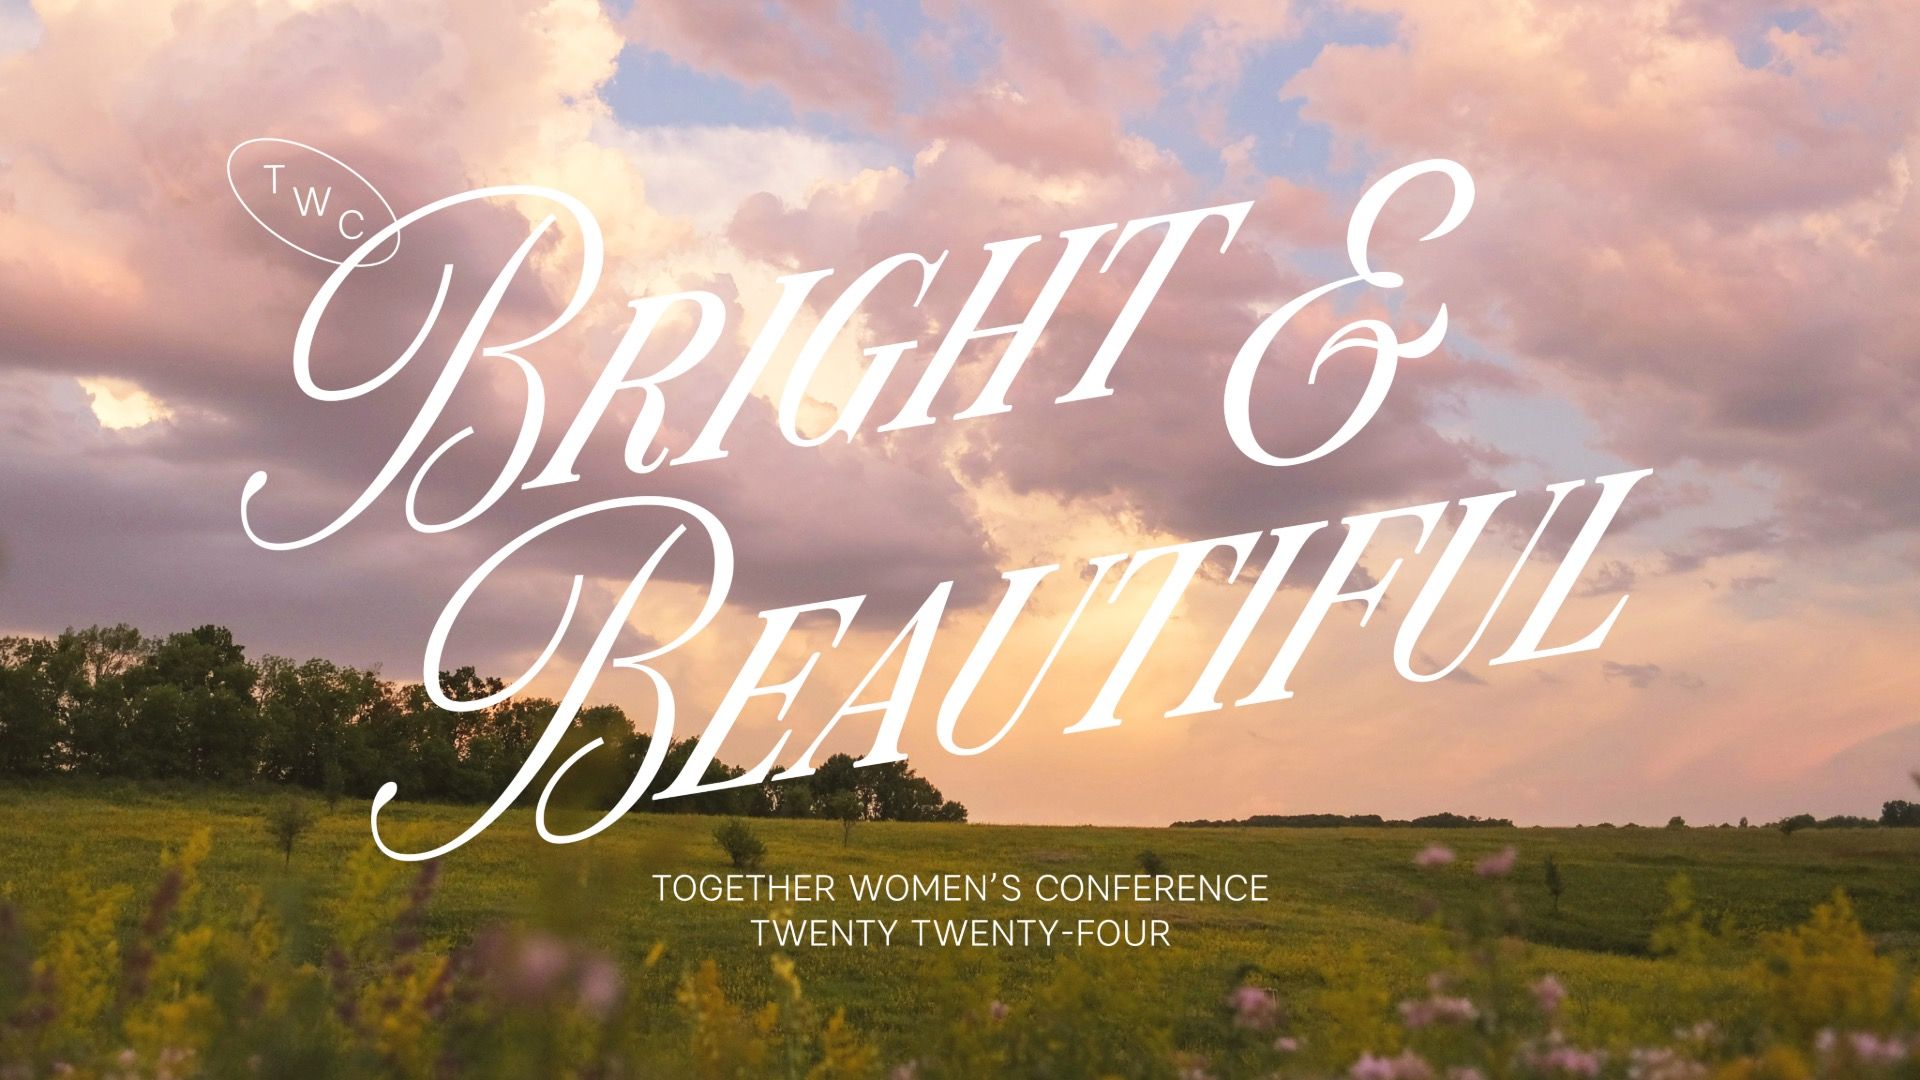 Together Women's Conference